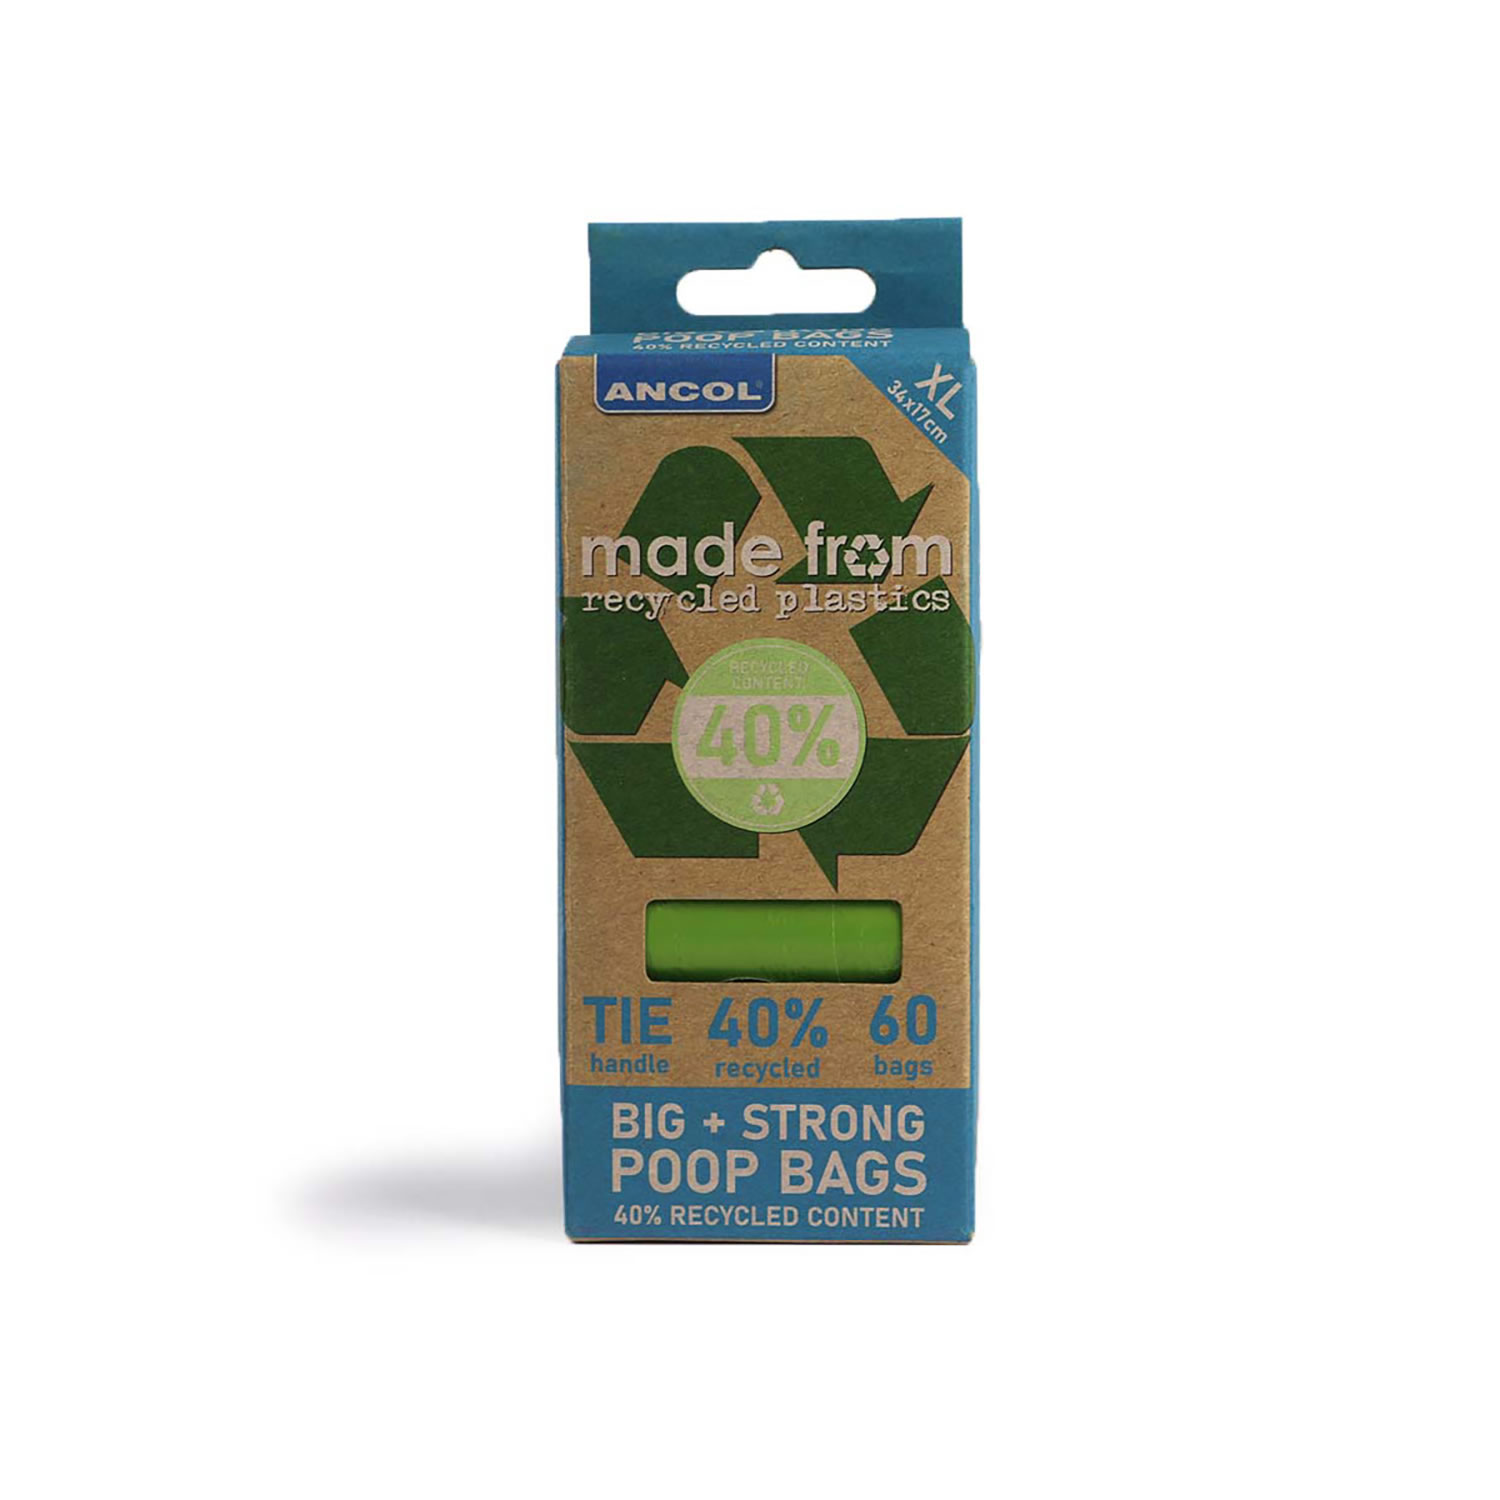 ANCOL MADE FROM - POOP BAG REFILL ANCOL MADE FROM - POOP BAG REFILL 4 PACK  4 PACK